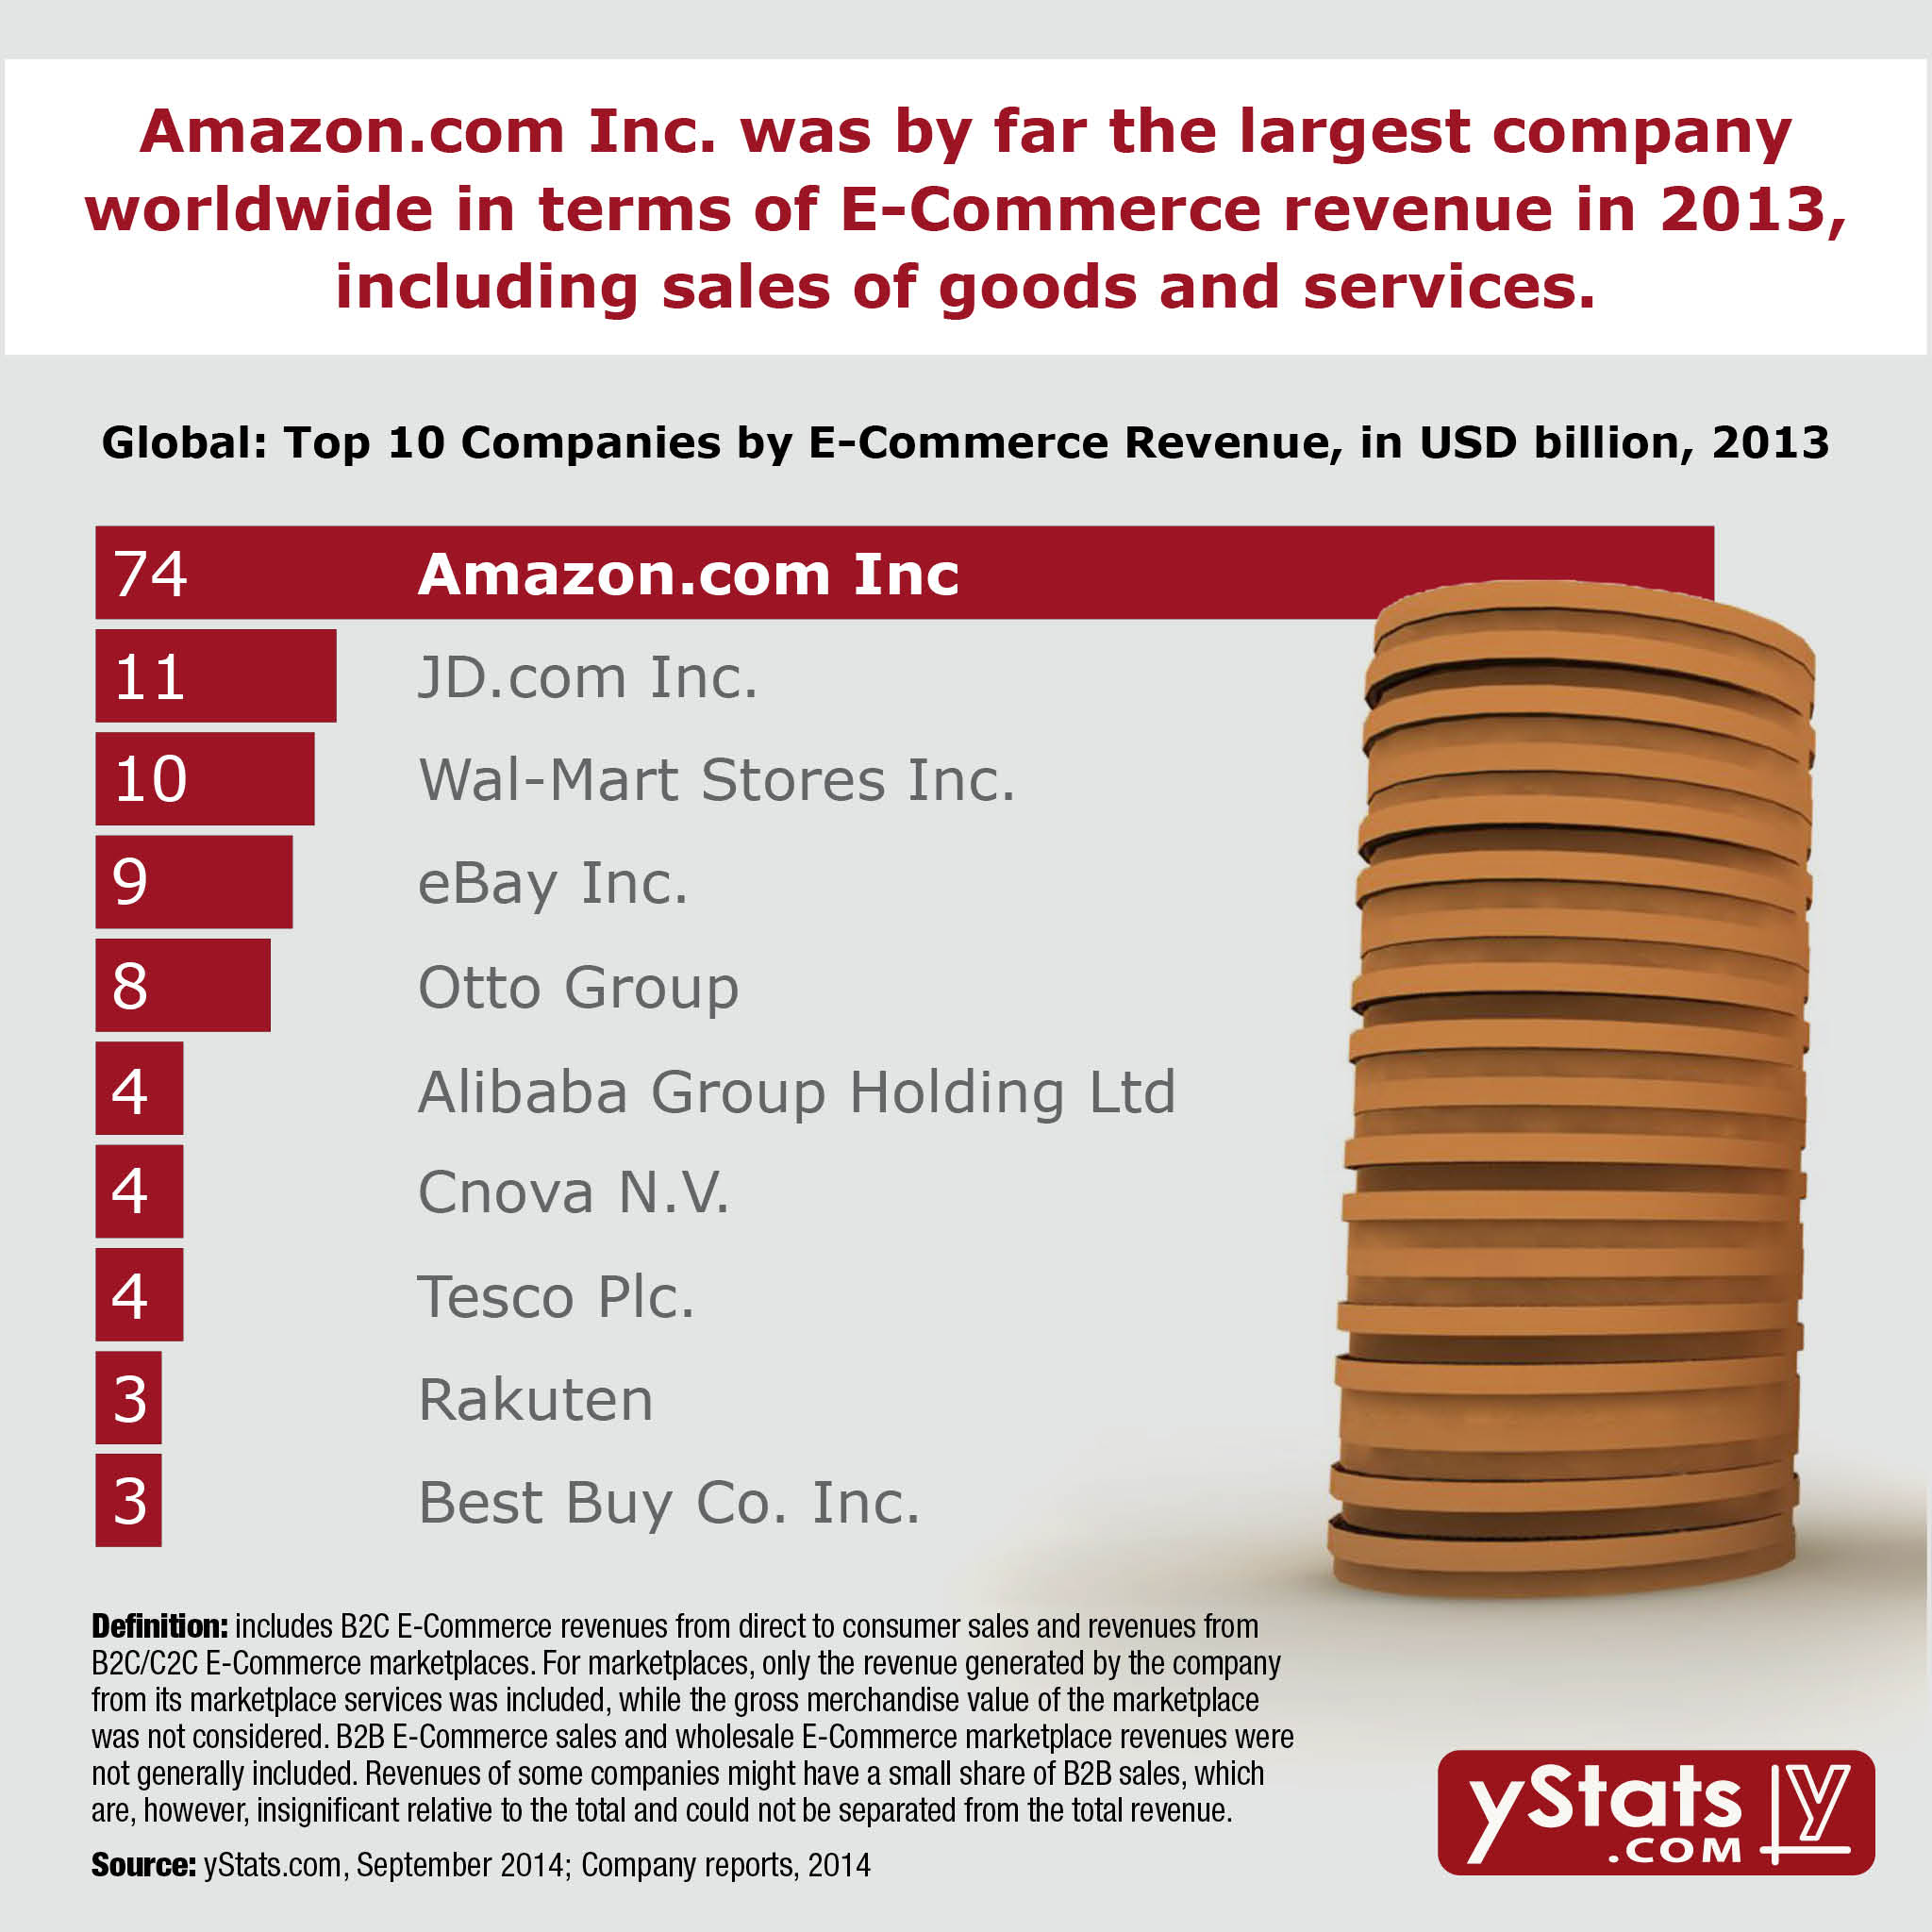 yStats.com Infographic The World’s Leading E-Commerce Companies 2014 1